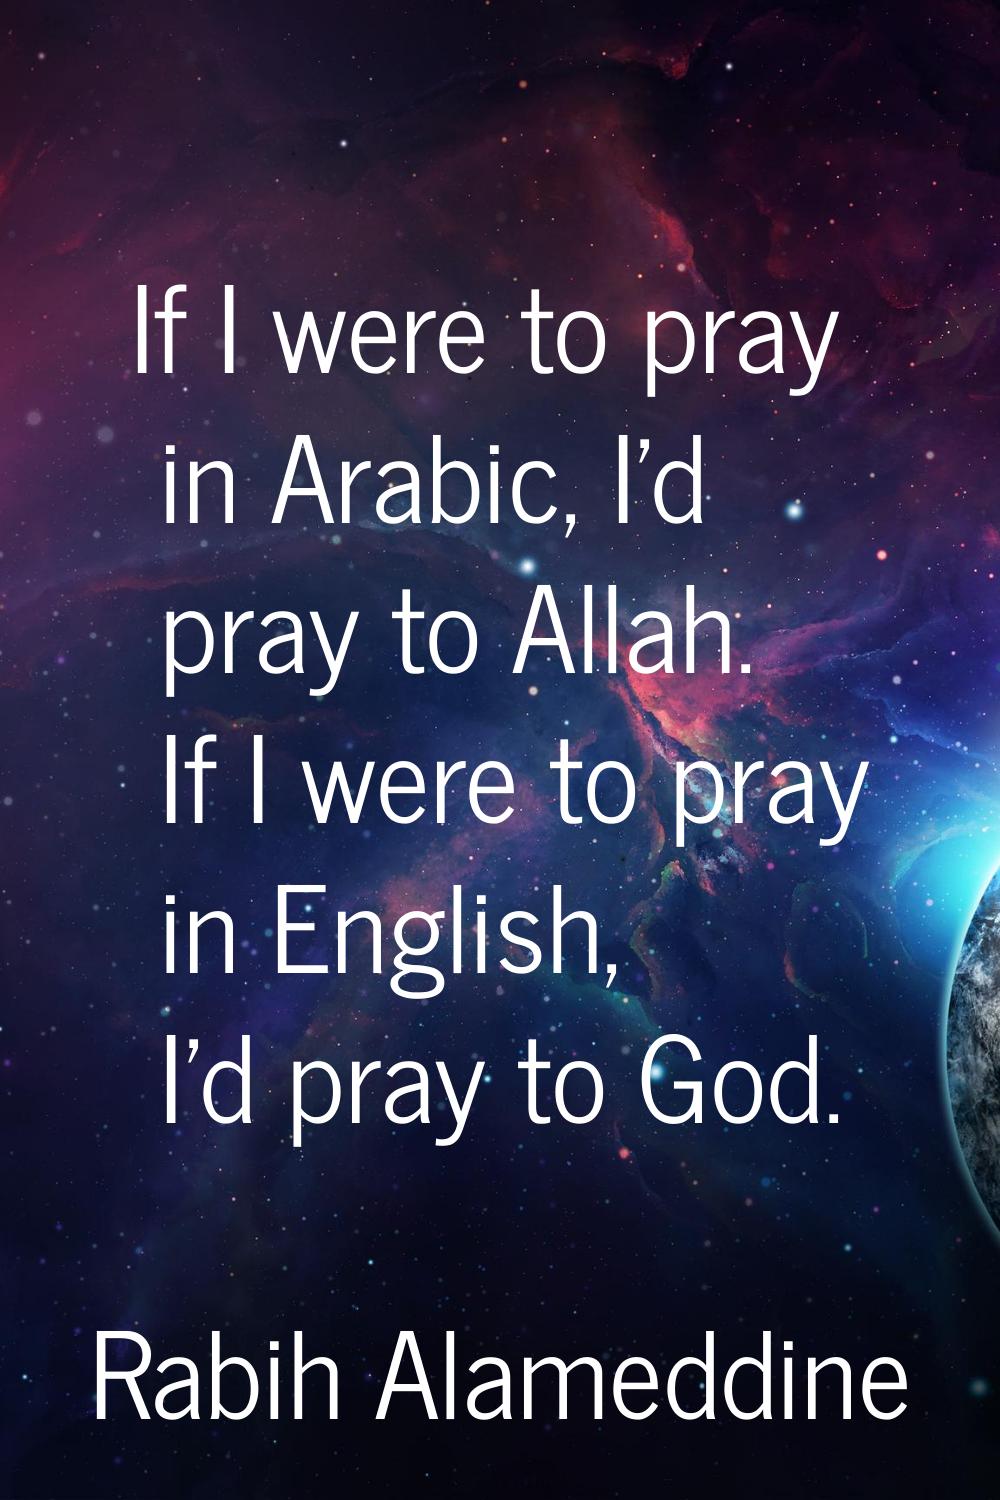 If I were to pray in Arabic, I'd pray to Allah. If I were to pray in English, I'd pray to God.